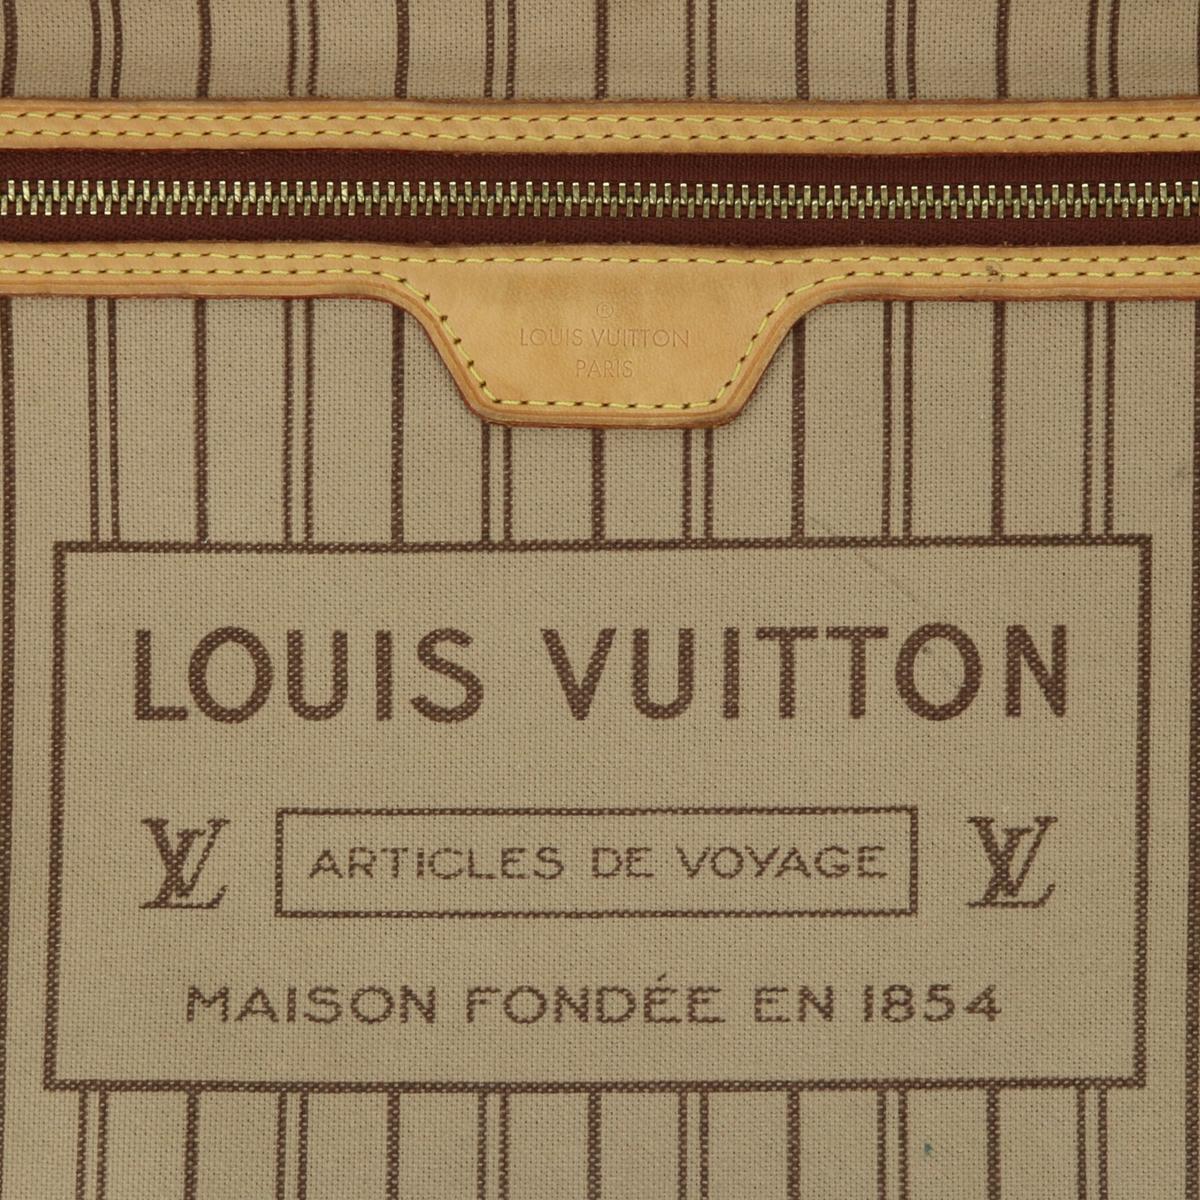 Louis Vuitton Neverfull MM Bag in Monogram with Beige Interior 2017 For Sale 12